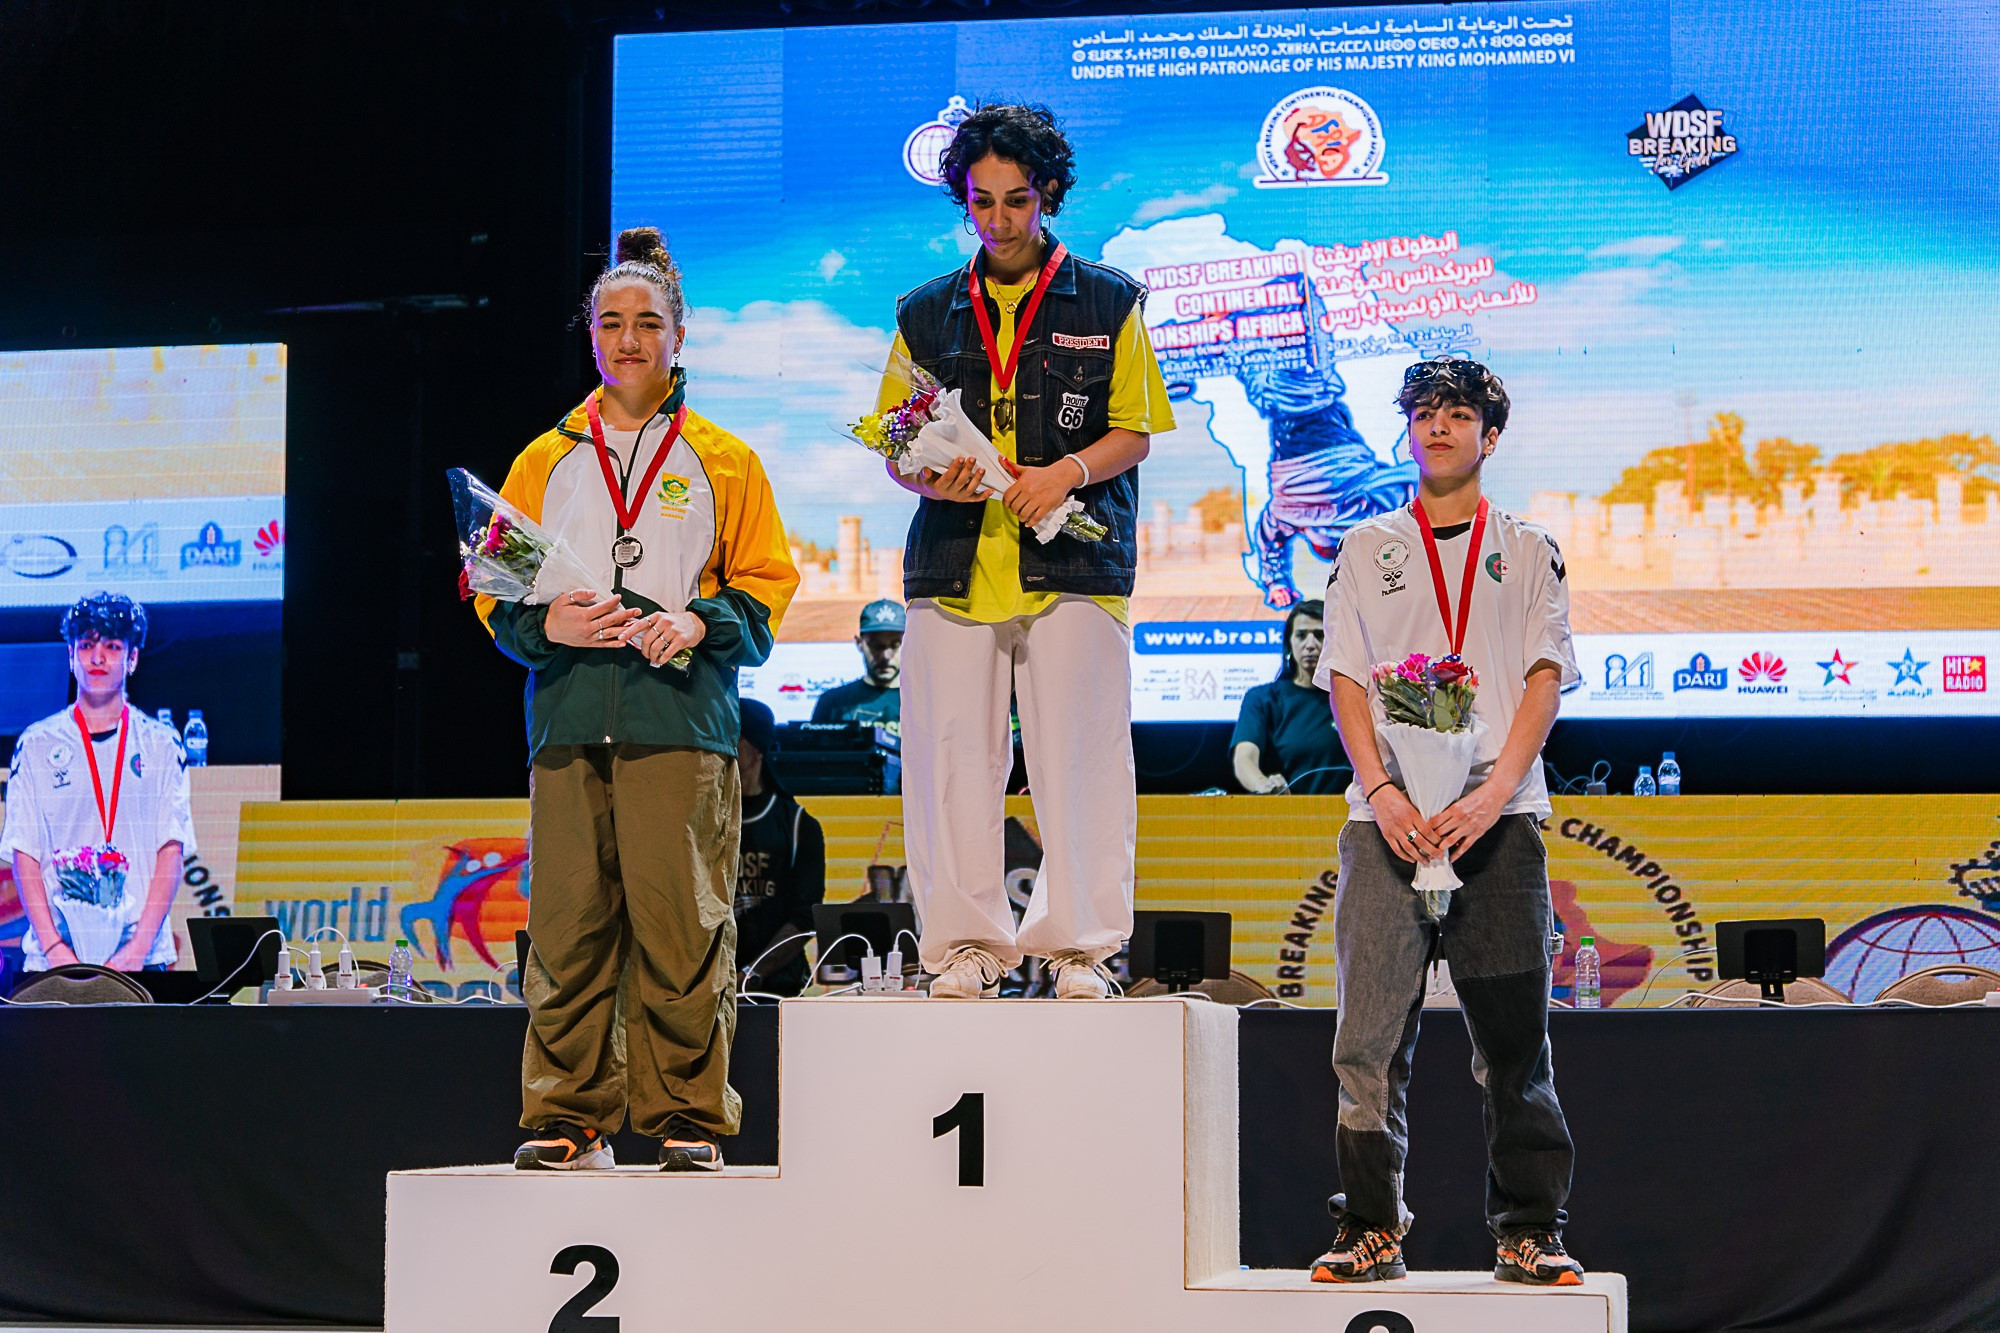 Fatima El-Mamouny was the b-girls winner at the first African Breaking Championships ©WDSF